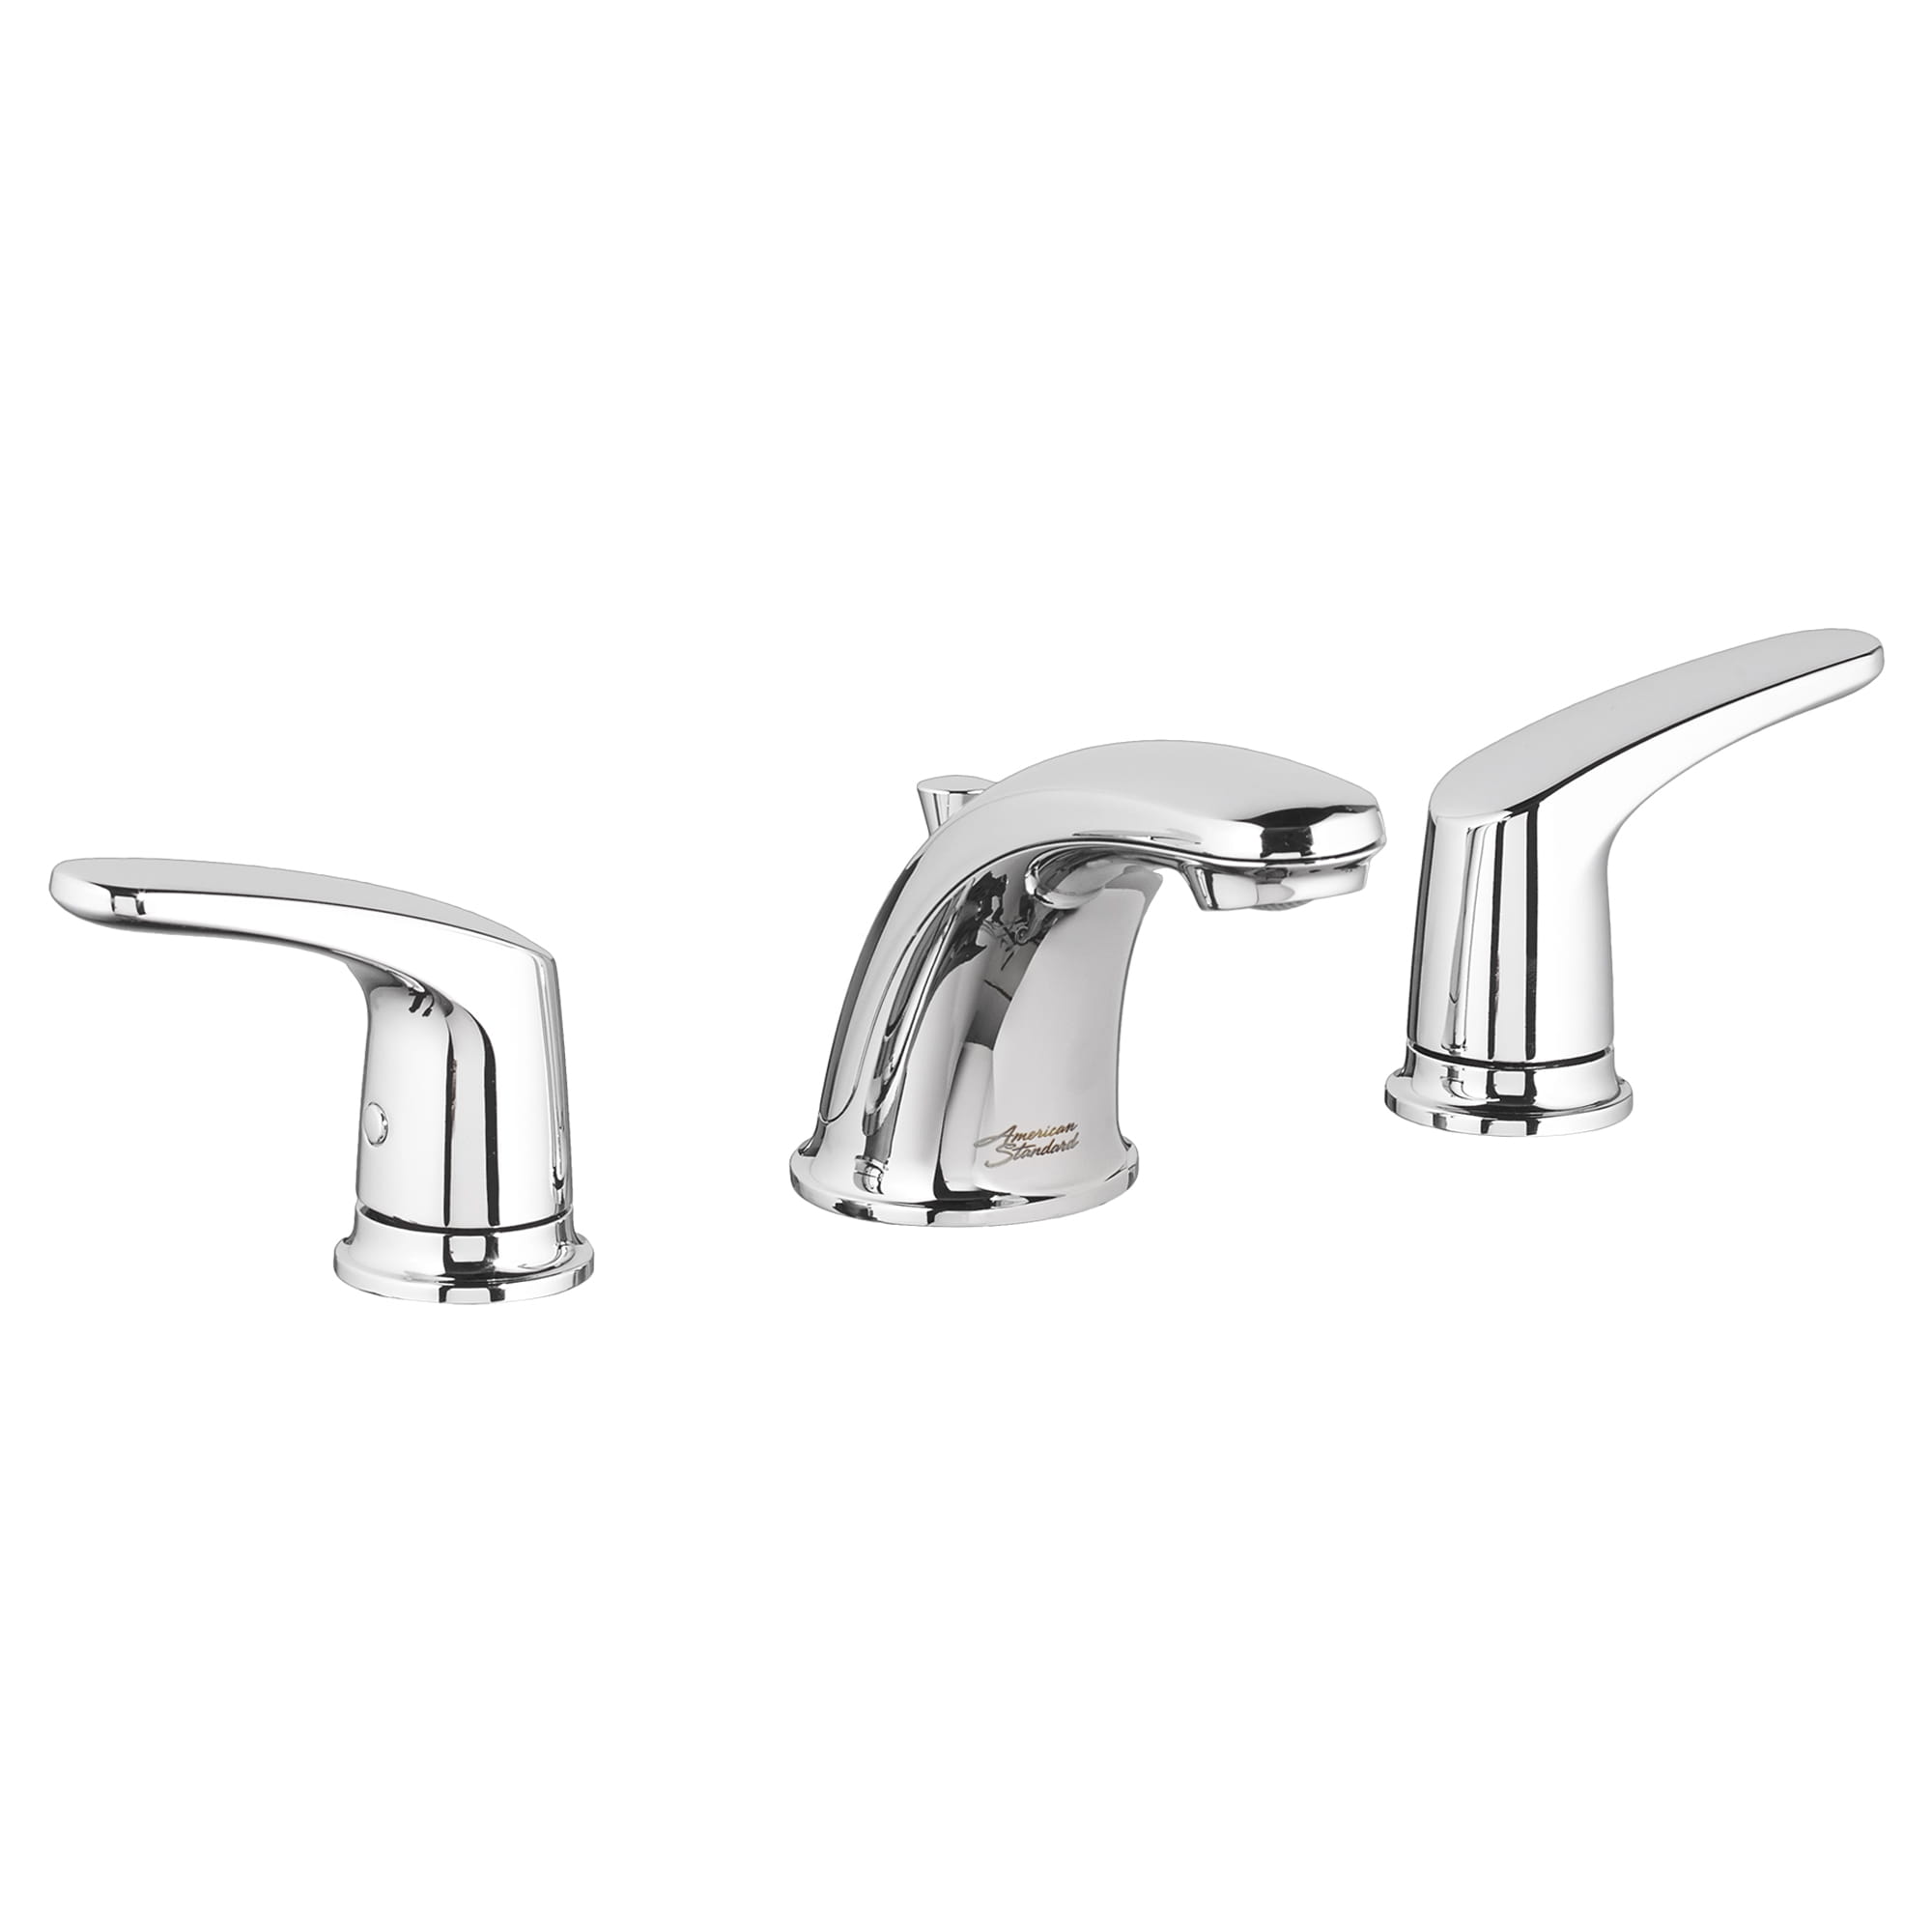 Colony PRO 8 Inch Widespread 2 Handle Bathroom Faucet 12 gpm 45 L min With Lever Handles CHROME